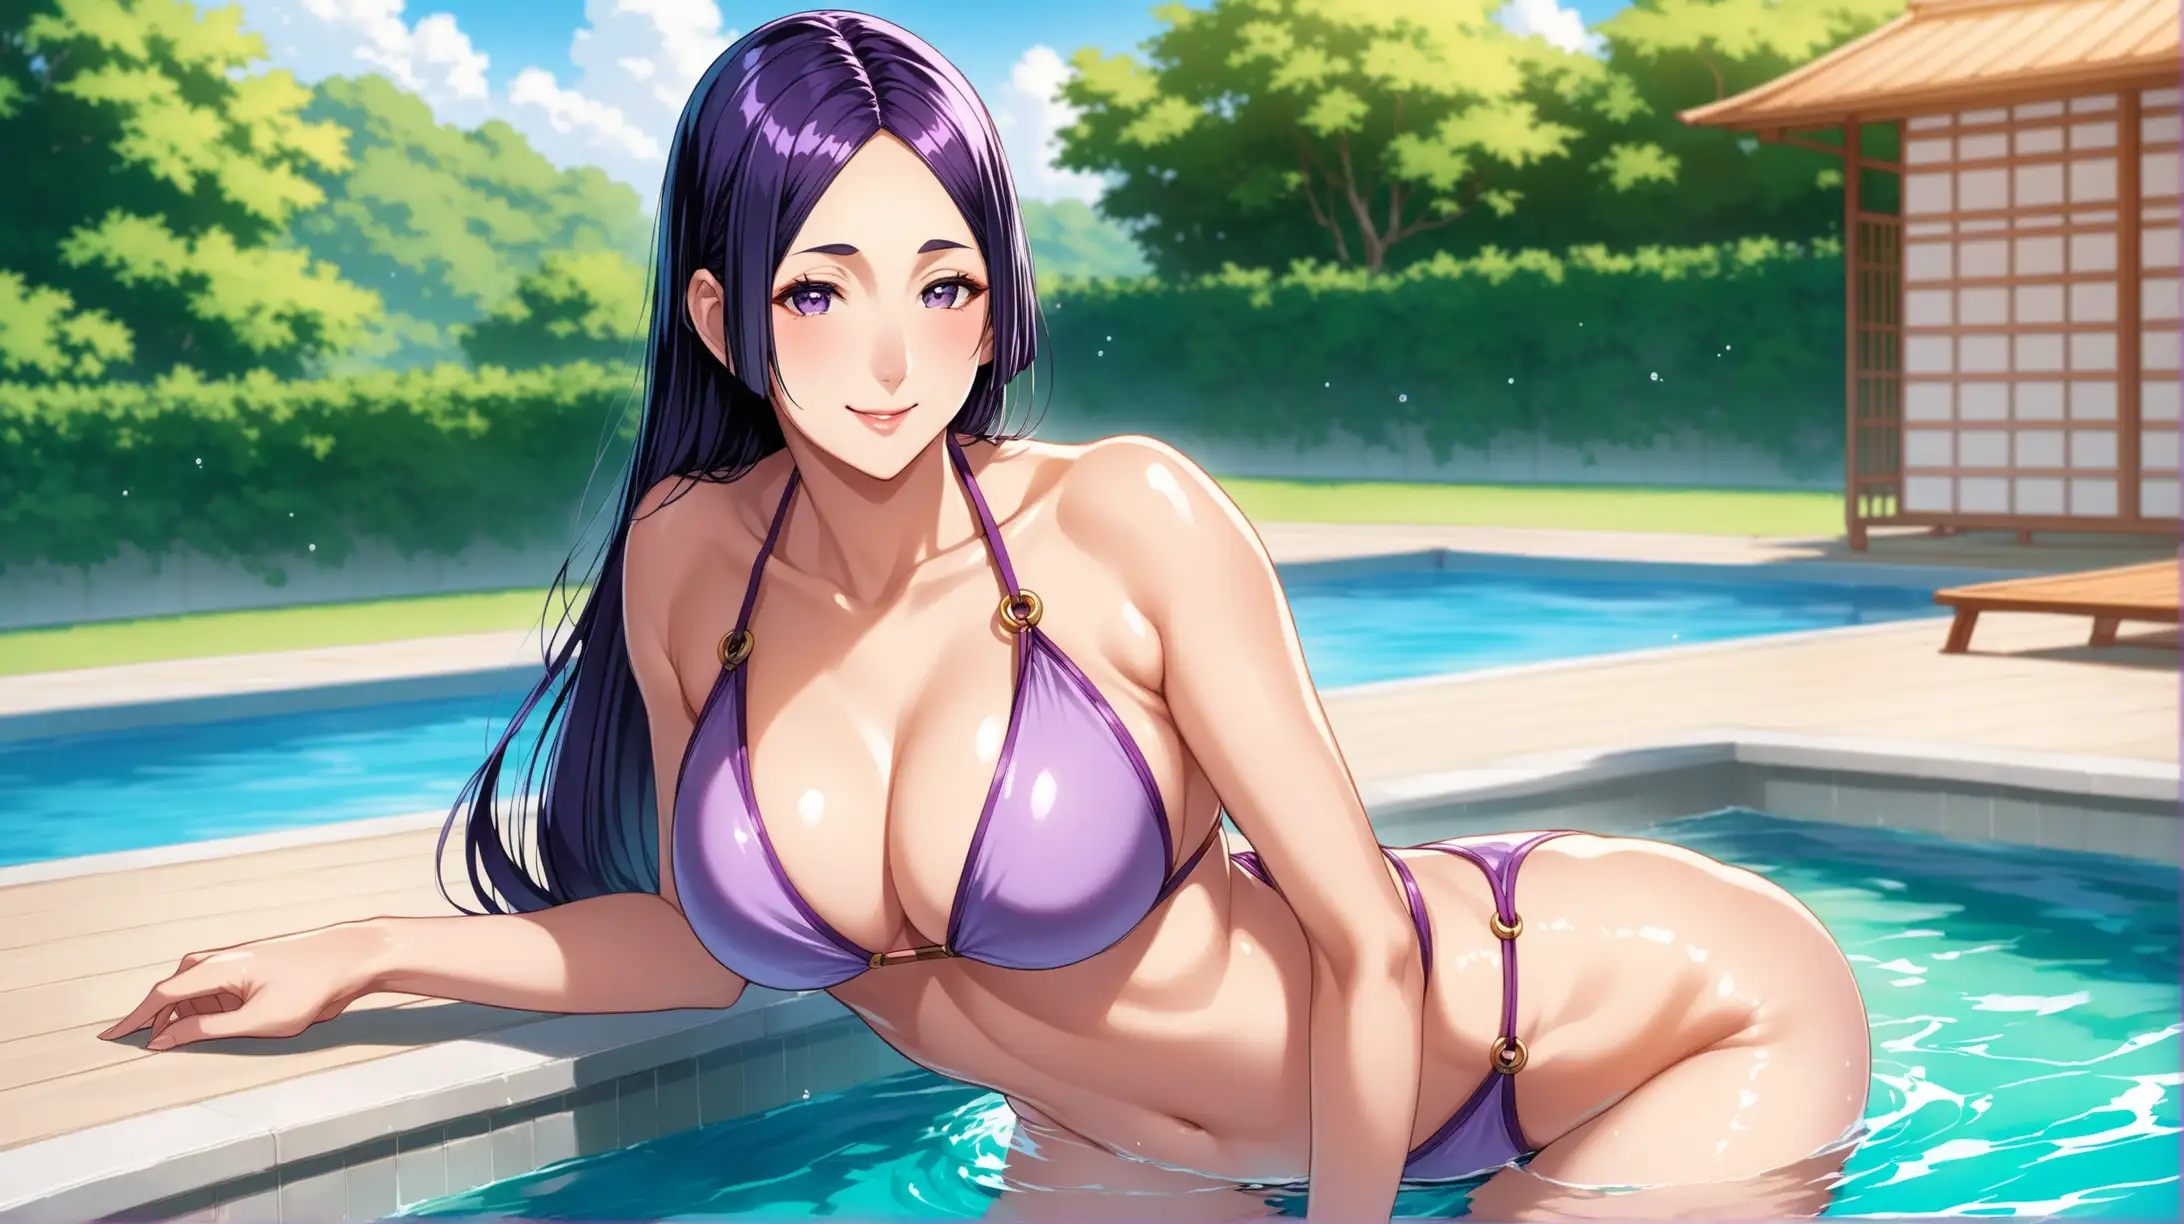 Draw the character Minamoto no Raikou, high quality, natural lighting, long shot, outdoors, swimming pool, seductive pose, wearing a swimsuit, smiling at the viewer